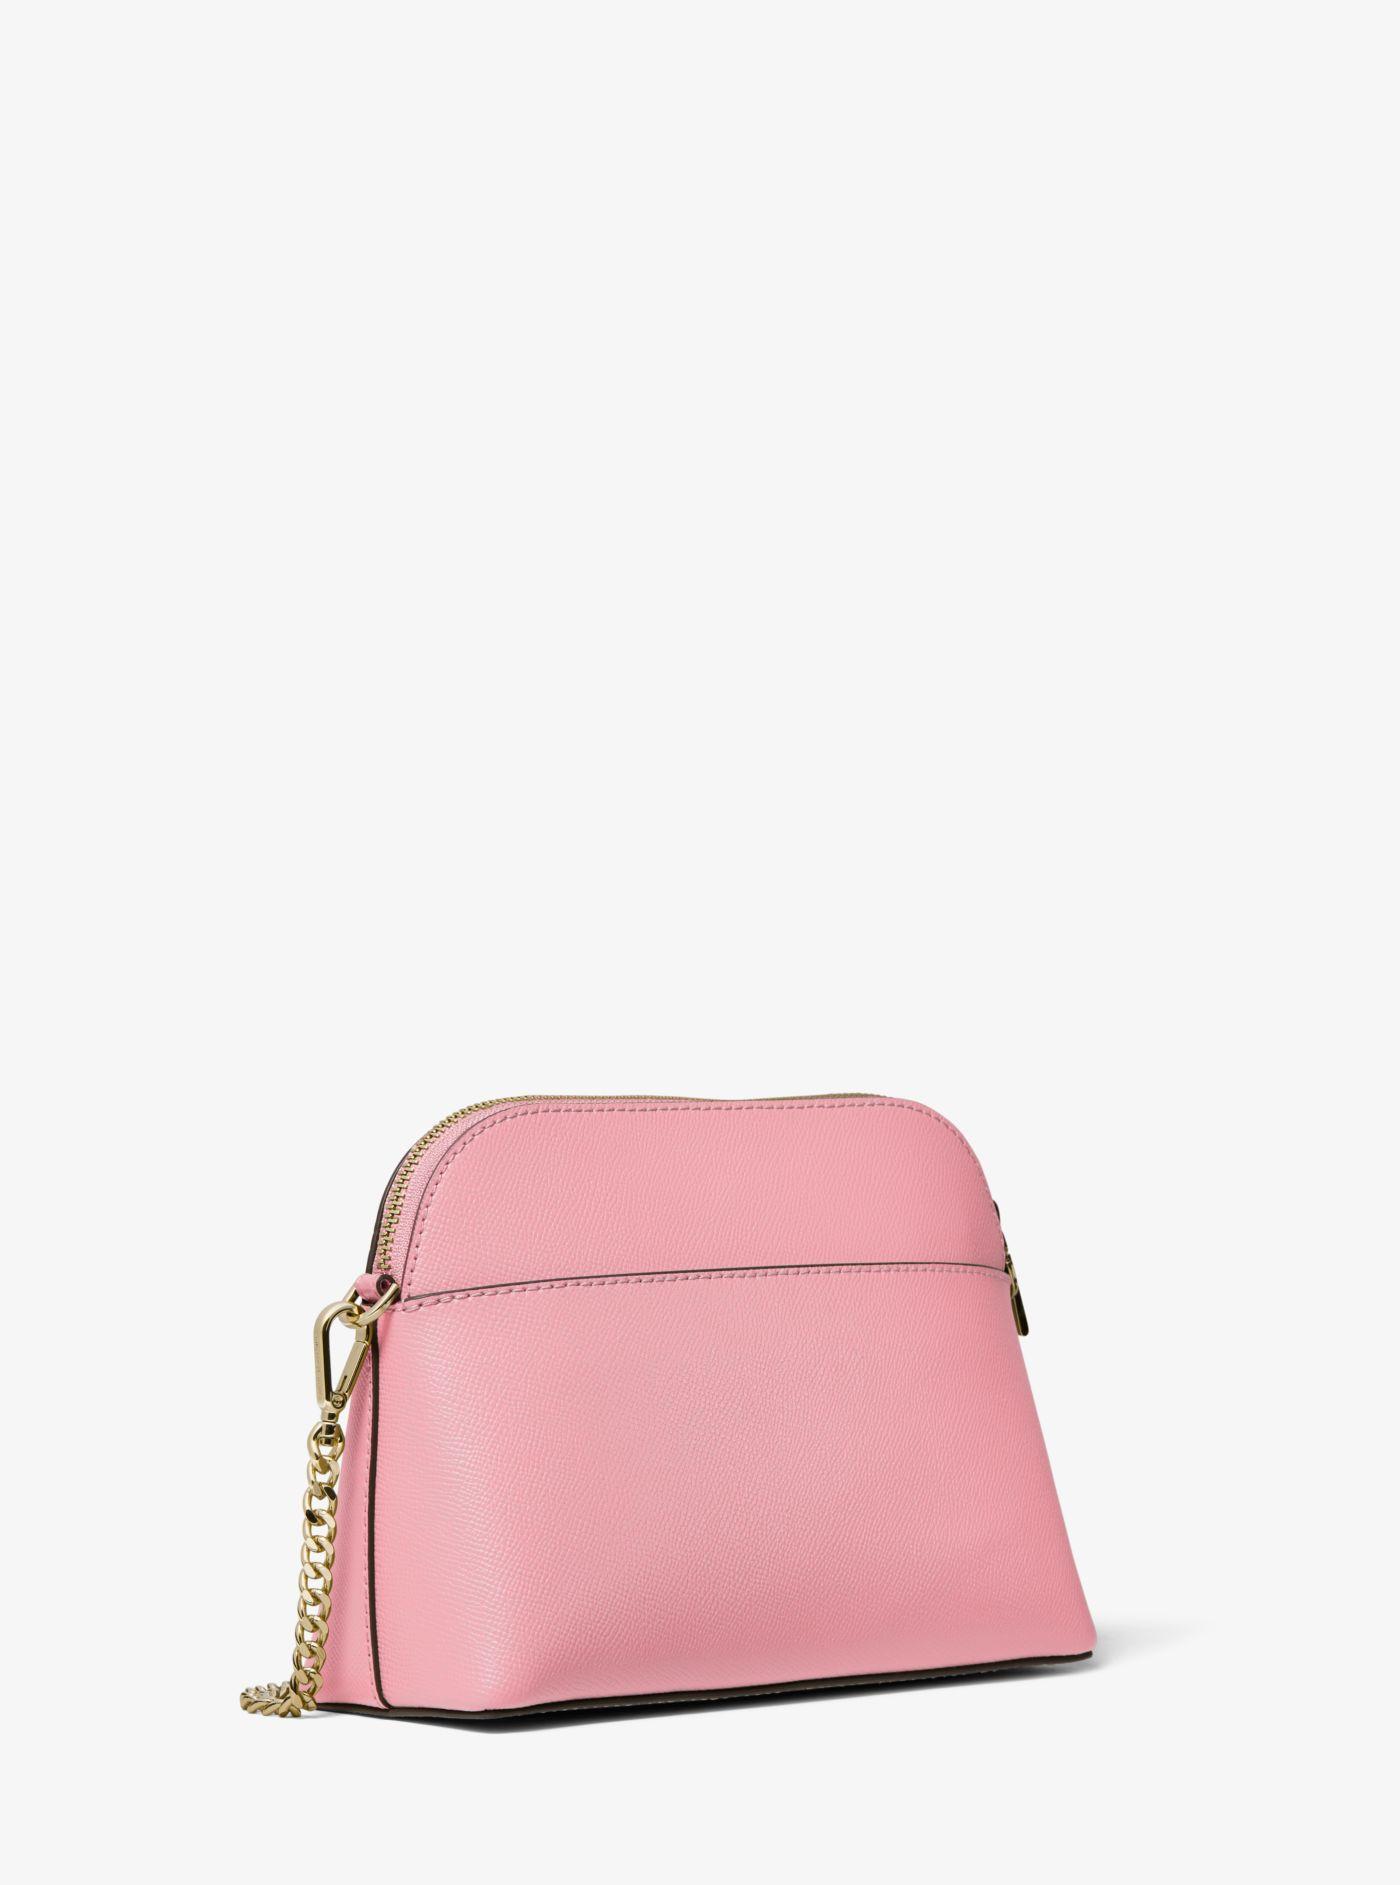 Michael Kors Large Crossgrain Leather Dome Crossbody Bag in Carnation  (Pink) | Lyst